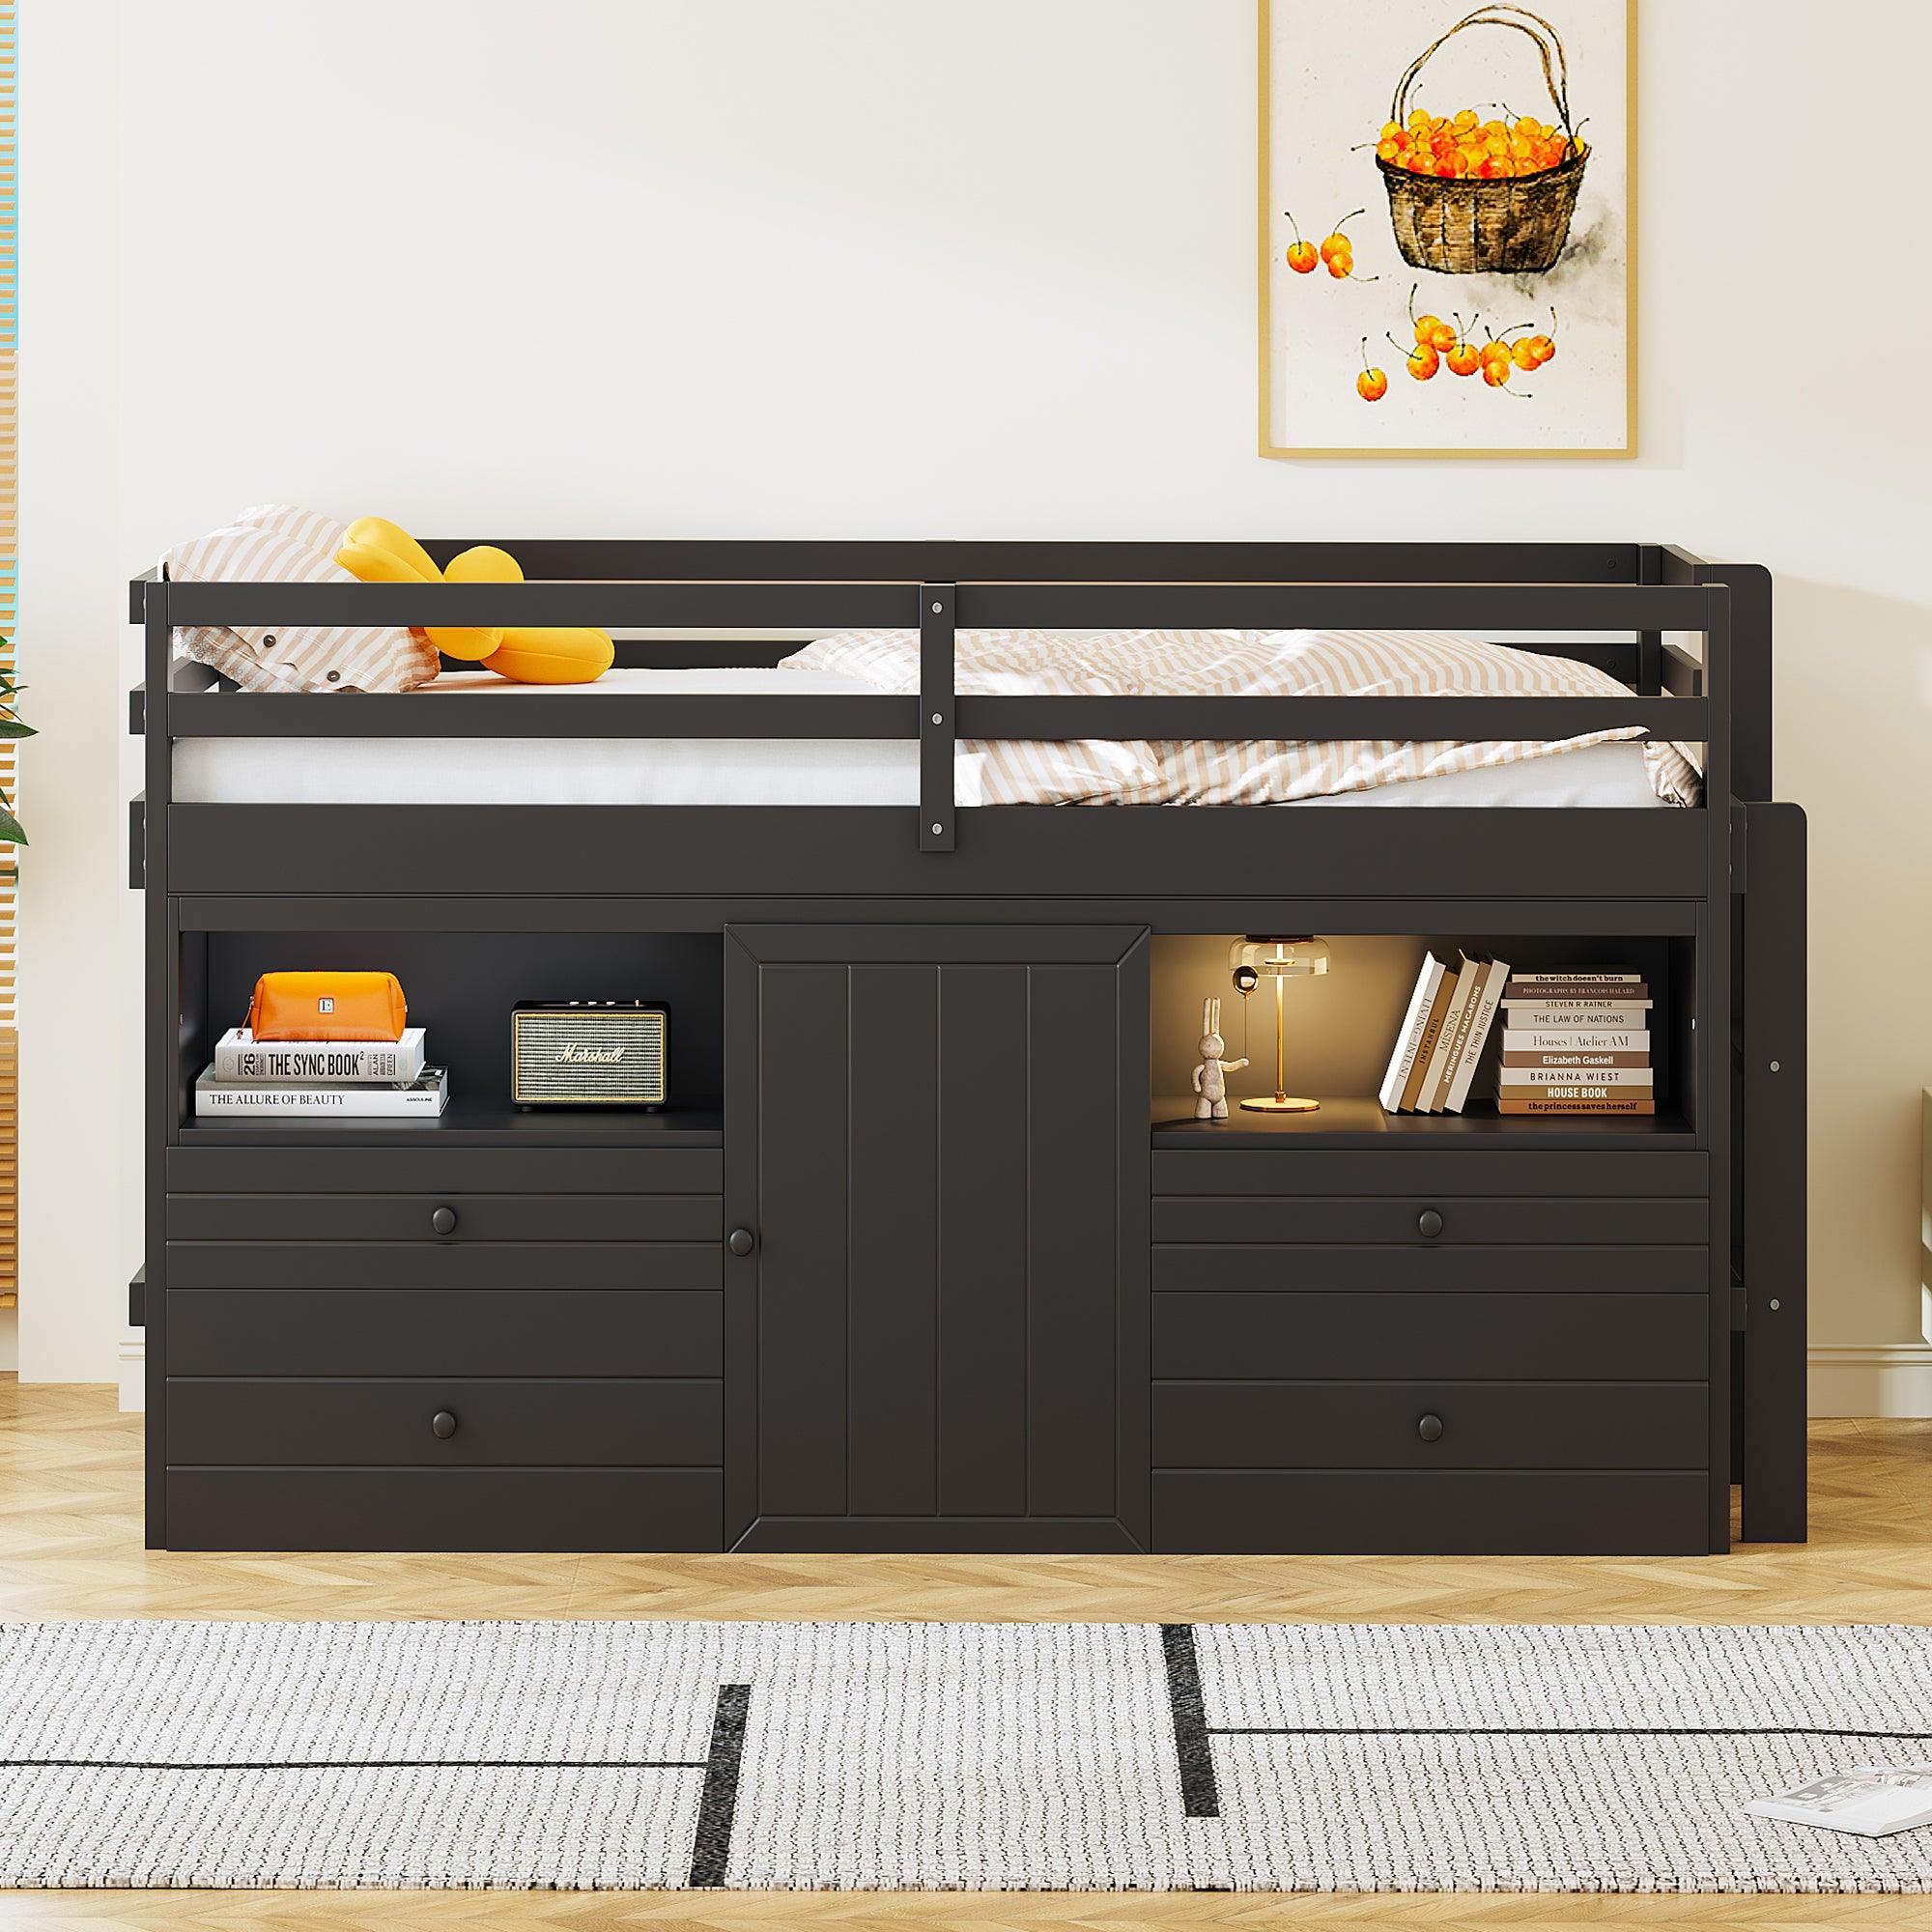 🆓🚛 Twin Size Loft Bed With 4 Drawers, Underneath Cabinet & Shelves, Espresso